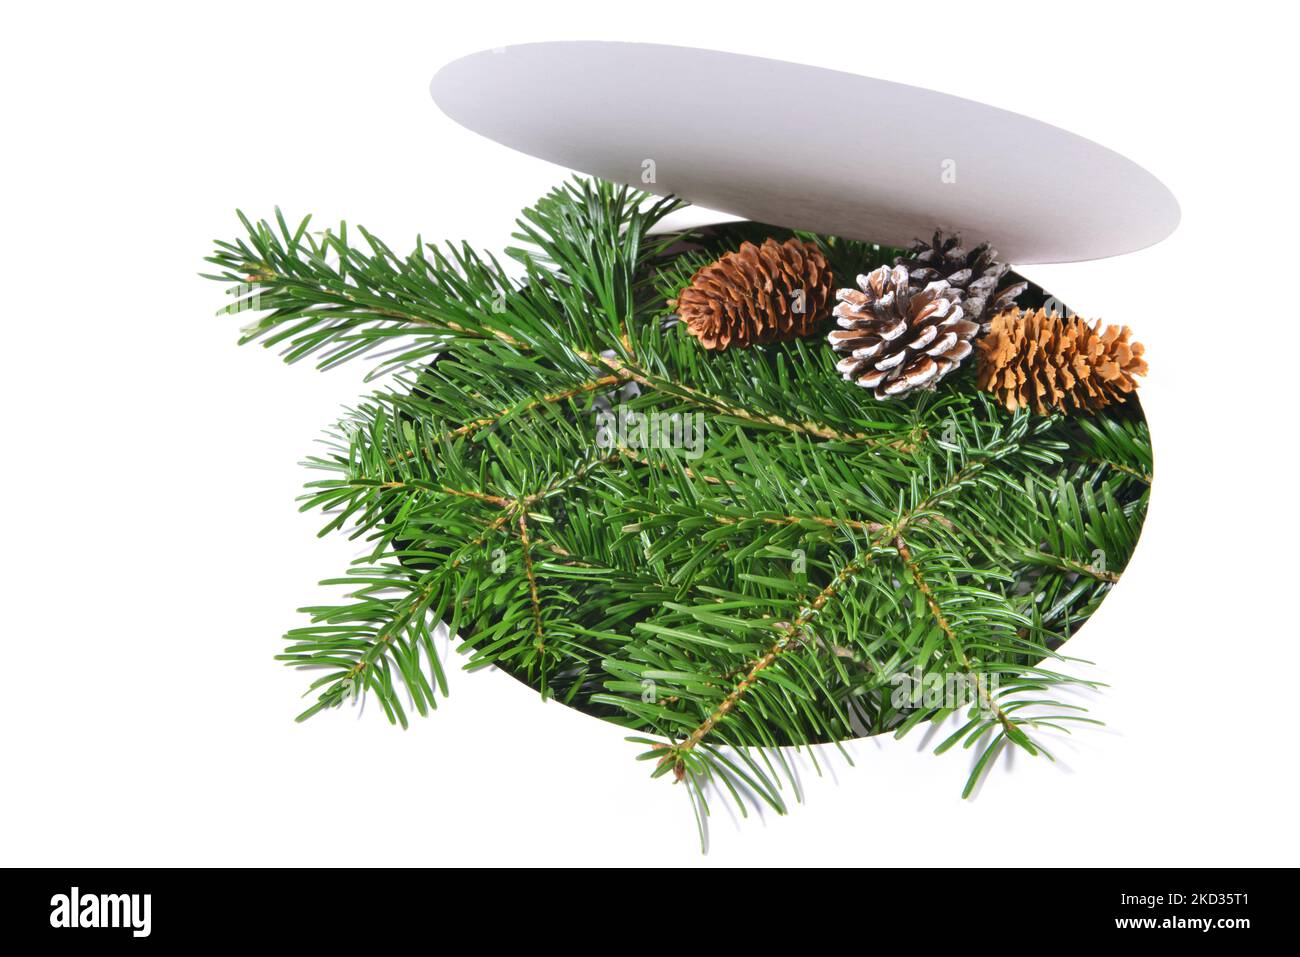 Christmas Fir Branches through round white Paper, with Fir Cones, isolated on white Background. Stock Photo